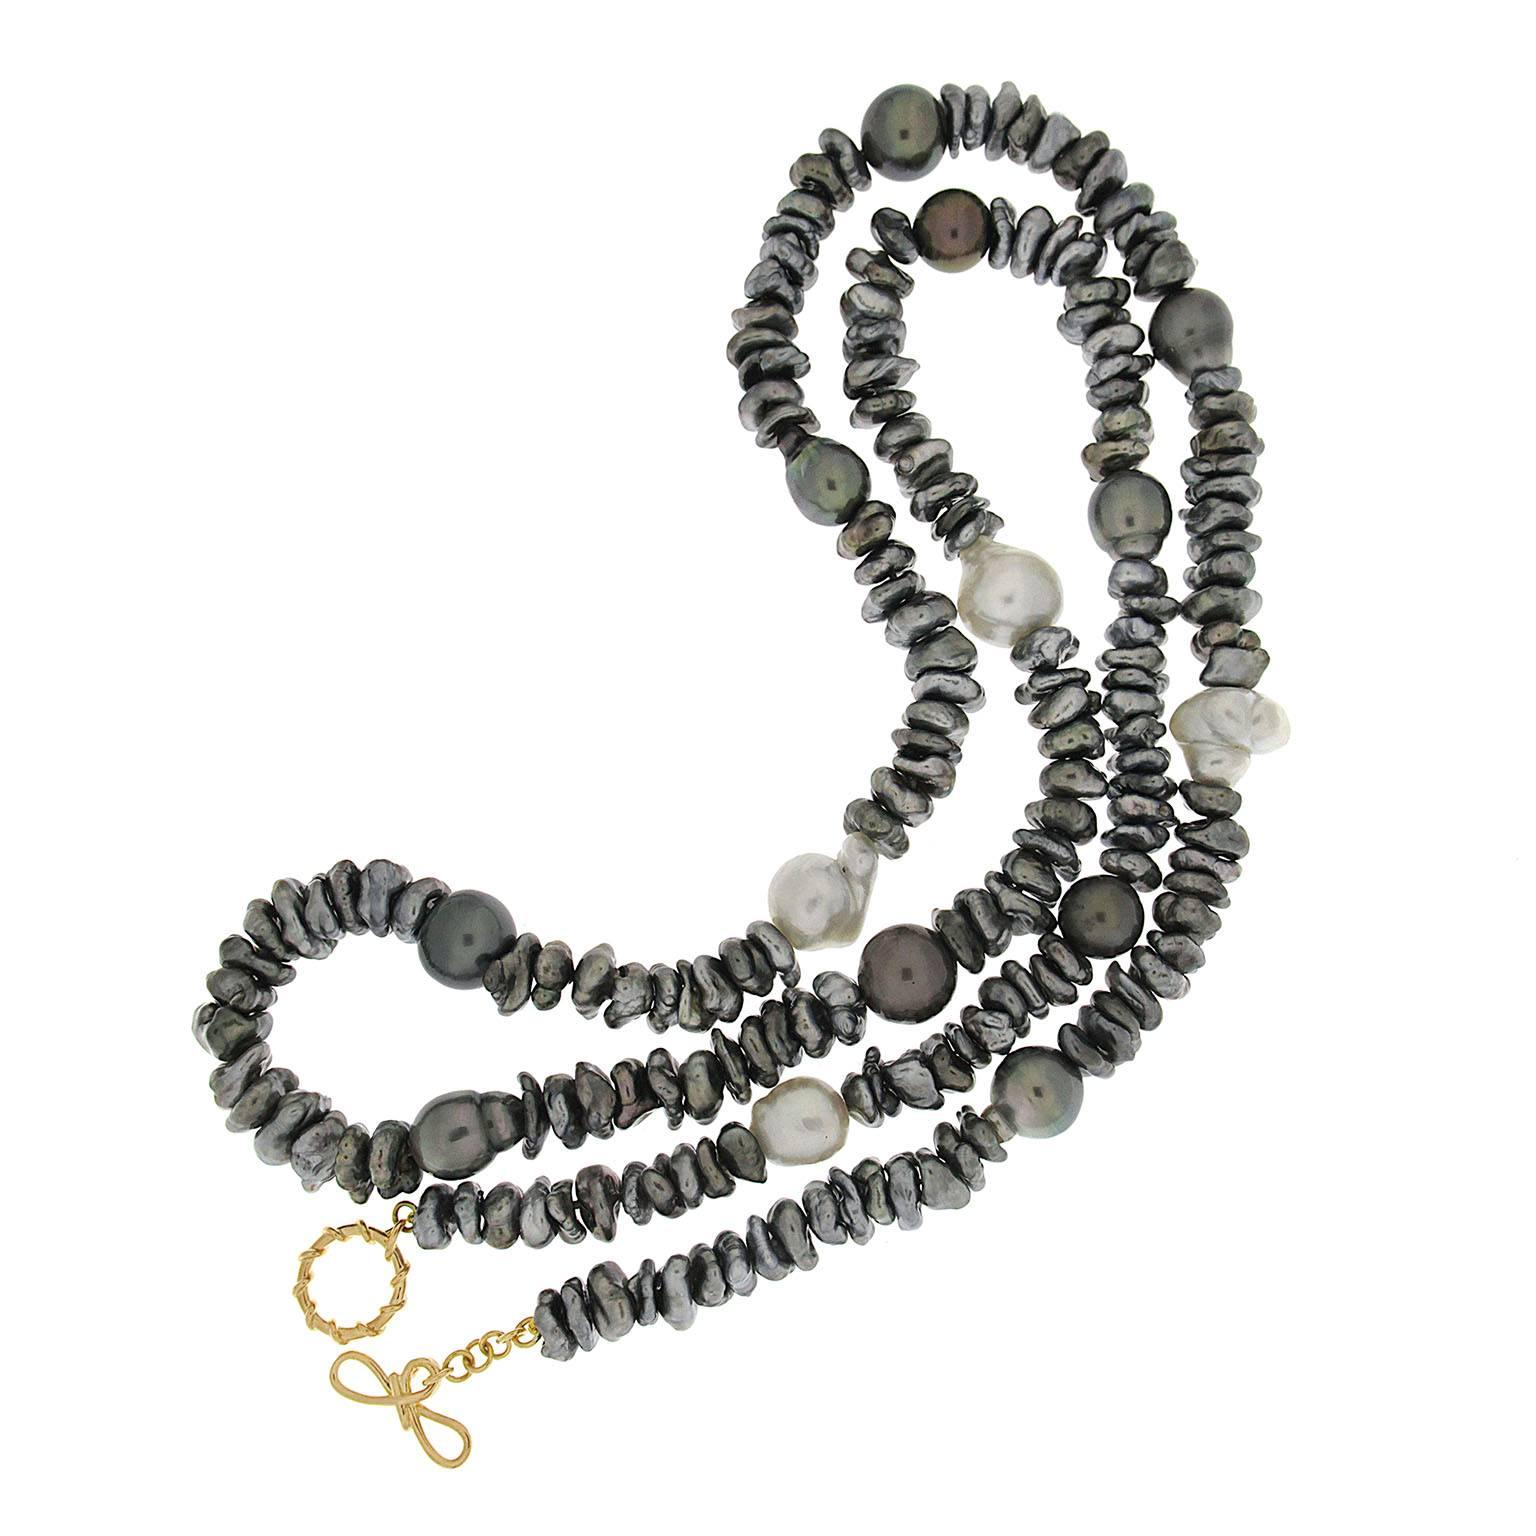 This lovely necklace features 10 Baroque Pearls and 4 South Sea Pearls and 86 Keshi Tahitian Pearls with Valentin Magro Signature knot clasp and toggle in 18kt yellow gold. 